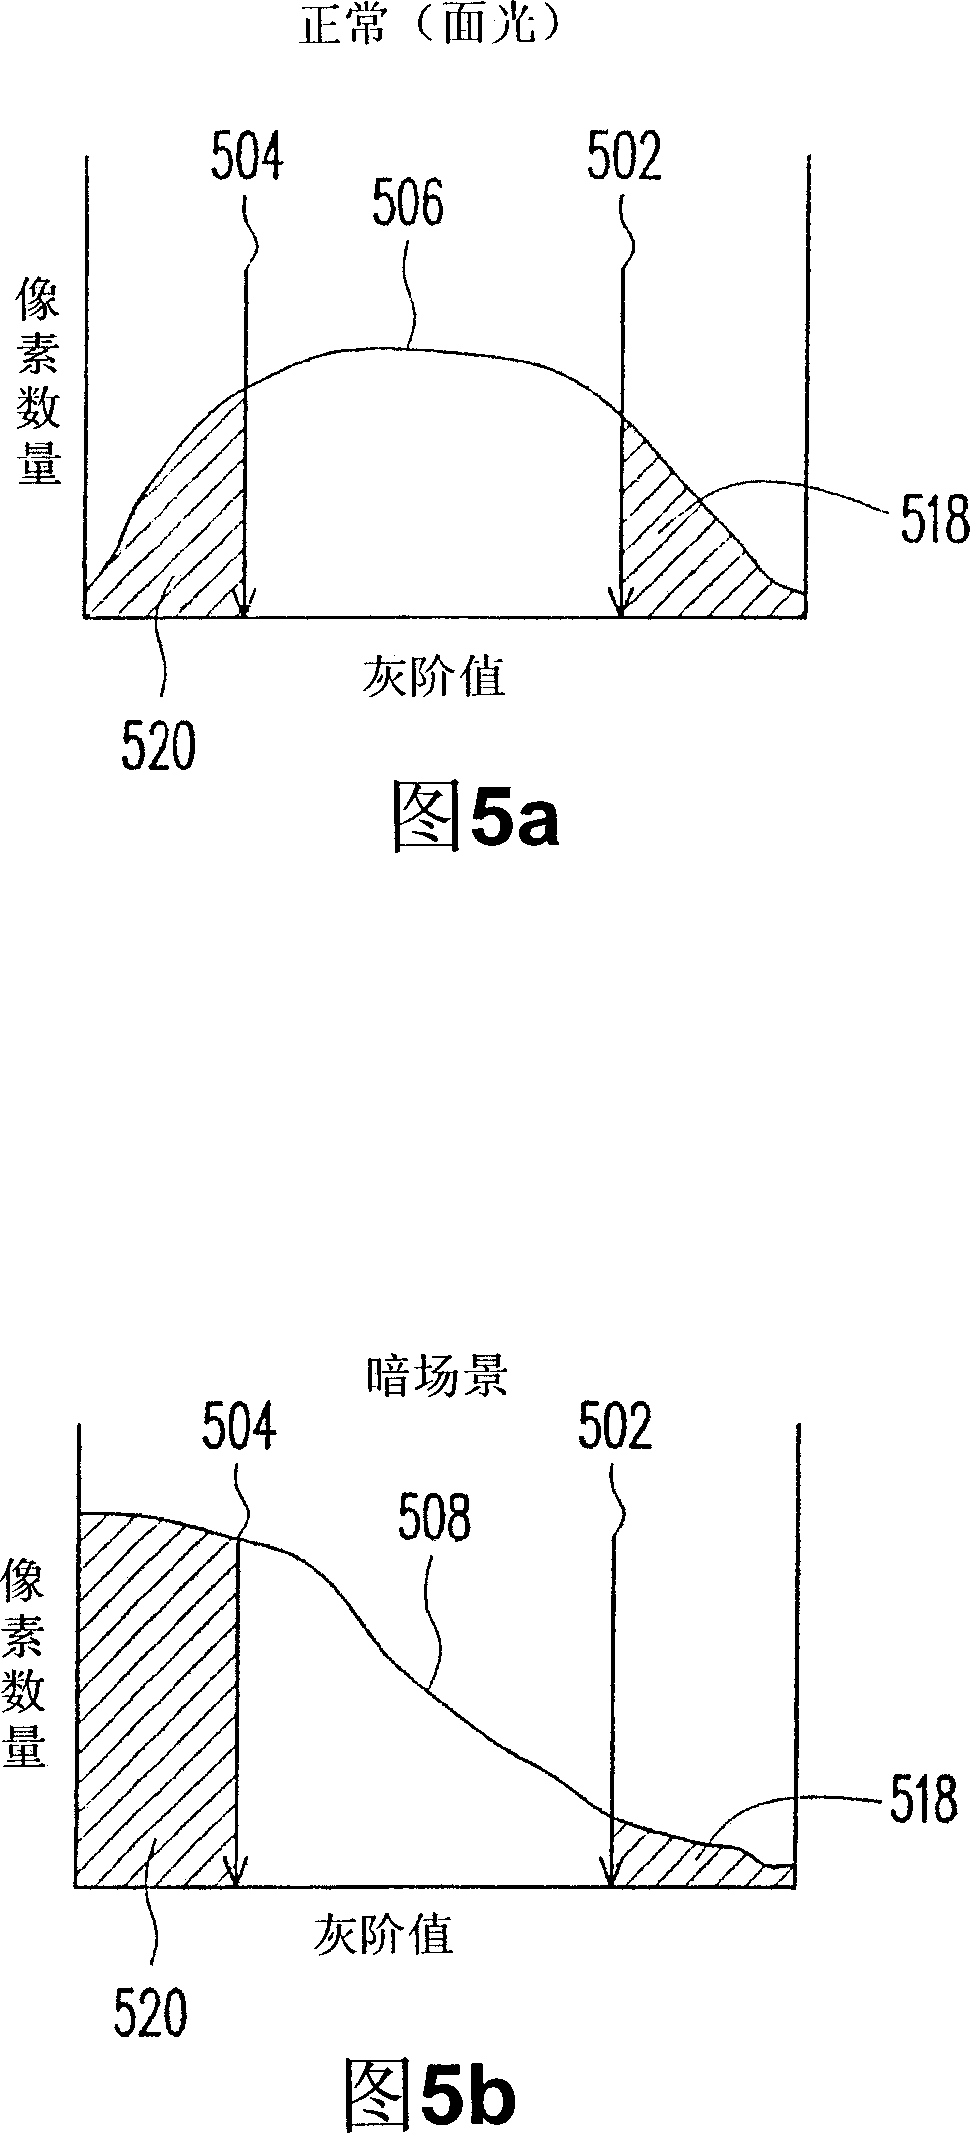 Method for automatically controlling exposure and device for automatically compensating exposure